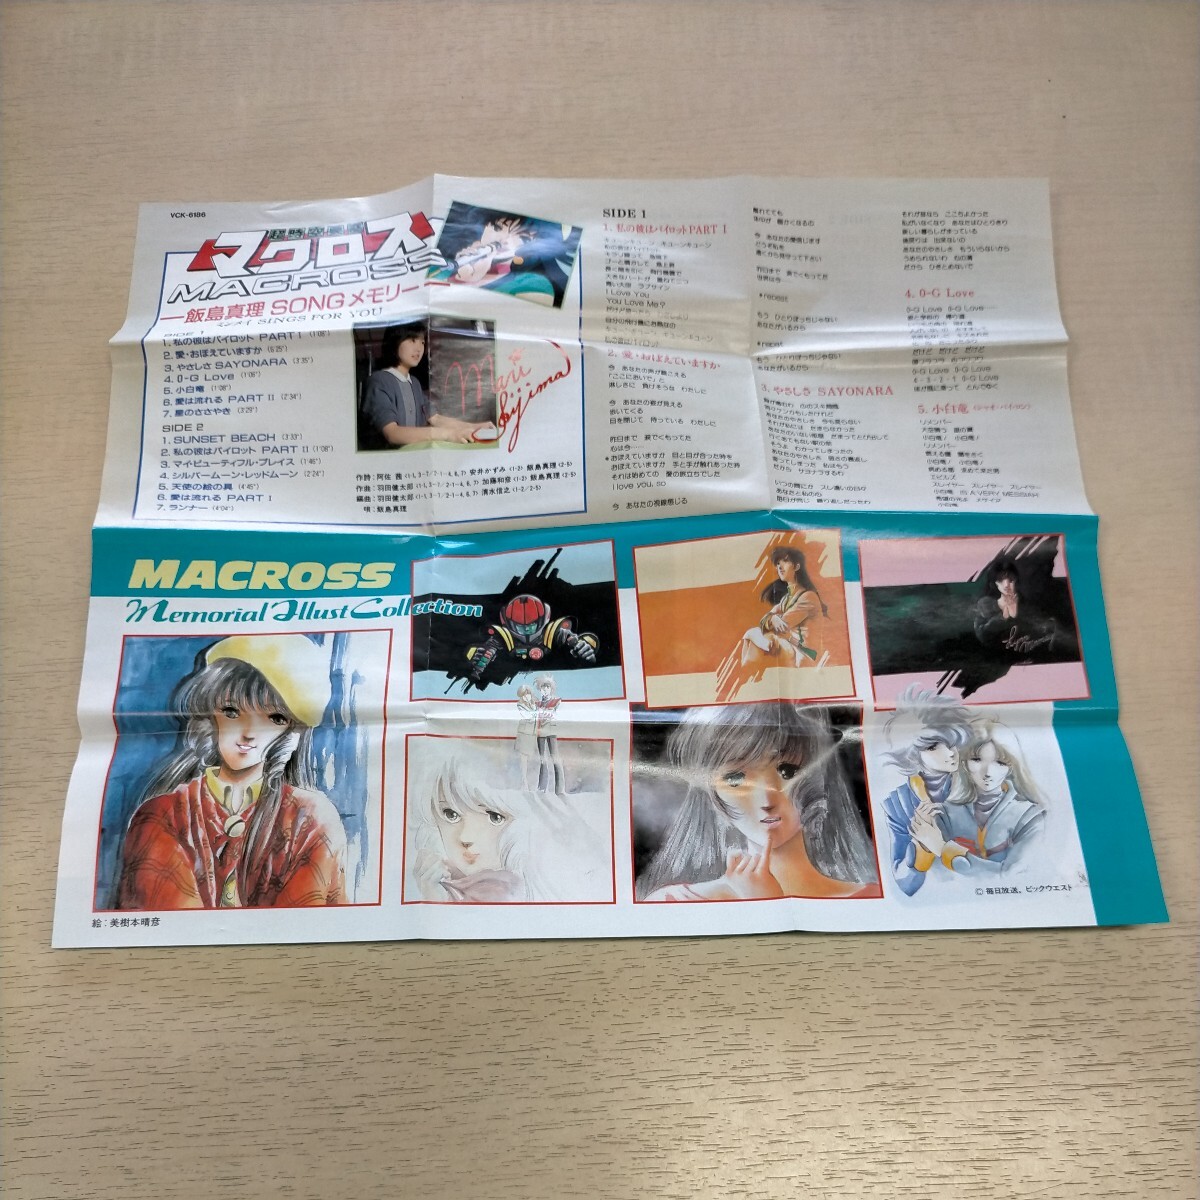  Super Dimension Fortress Macross Iijima Mari SONG memory mimeiSINGS* used / reproduction not yet verification / no claim ./ present condition delivery / condition is photograph .. please verify /VCK-6186